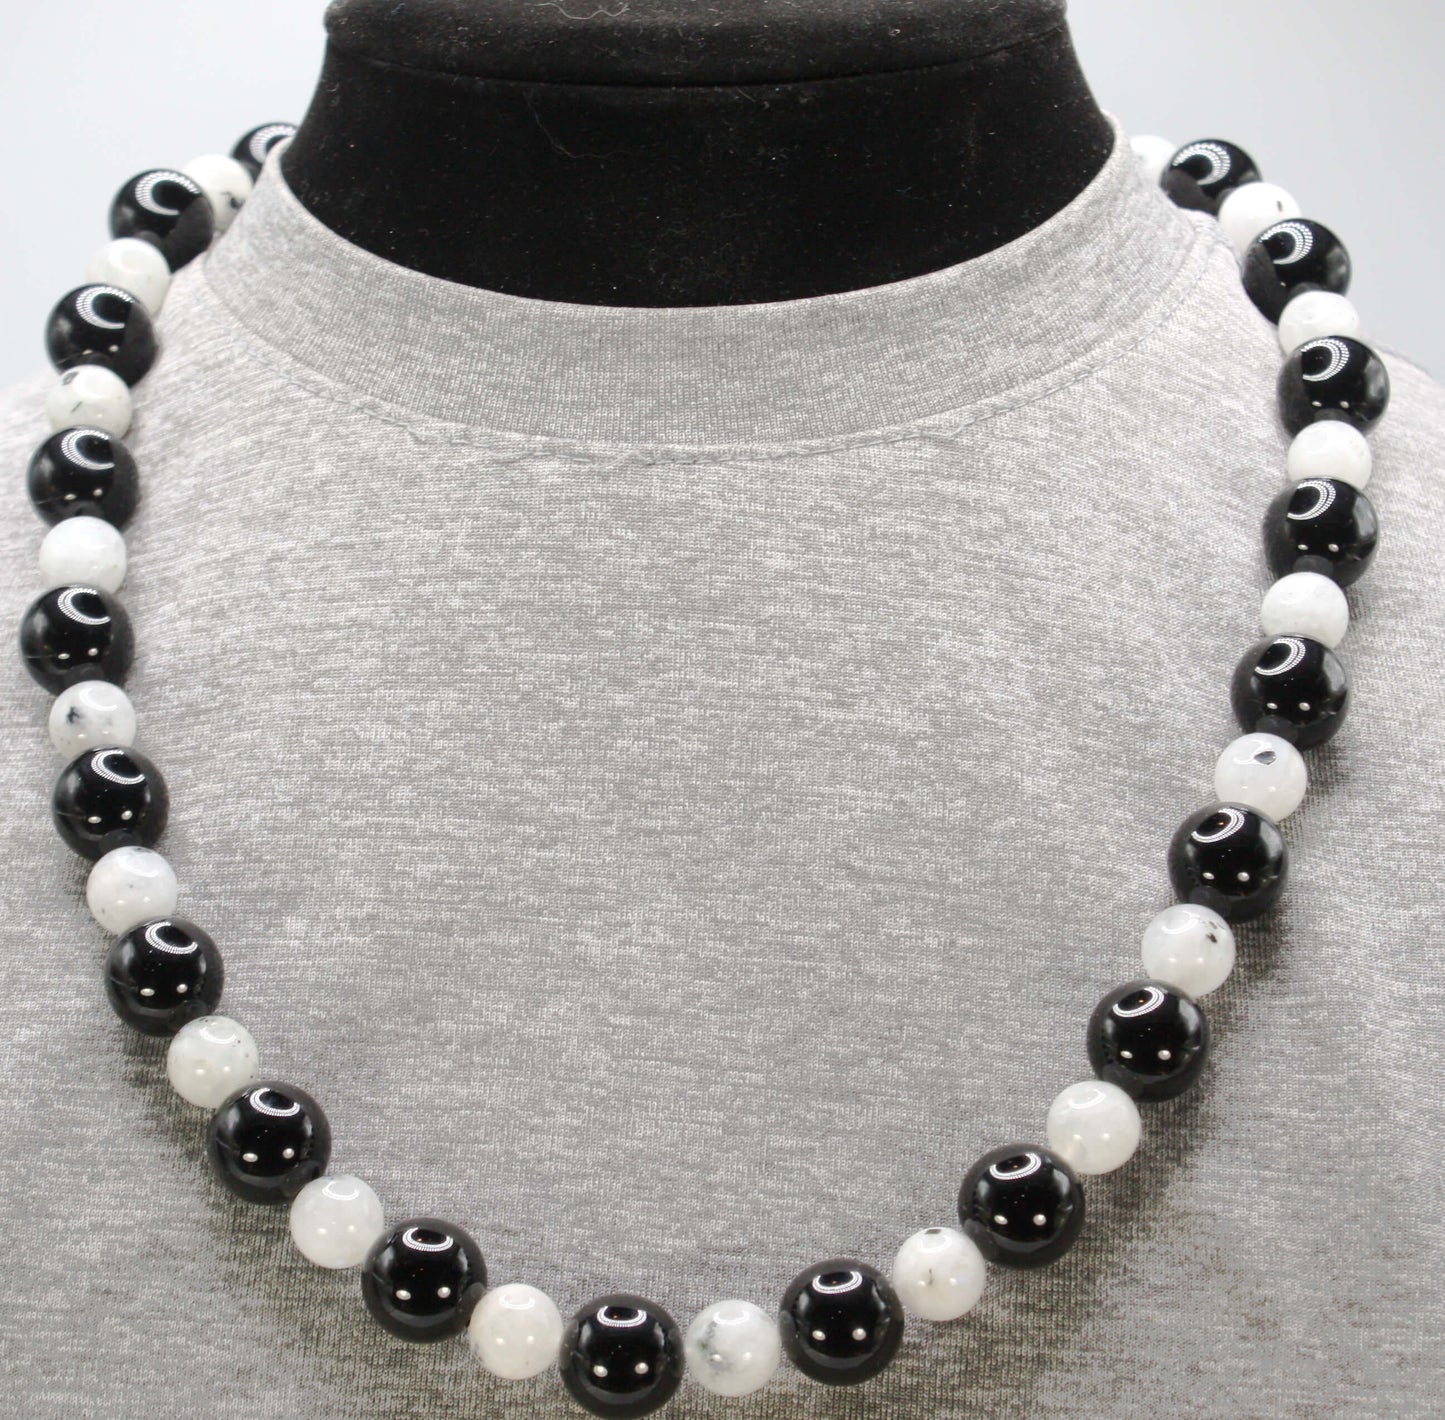 Genuine Obsidian and Lapis Lazuli Necklace - Gift for Men/Woman - 14mm and 10mm Bead Diameter Necklace